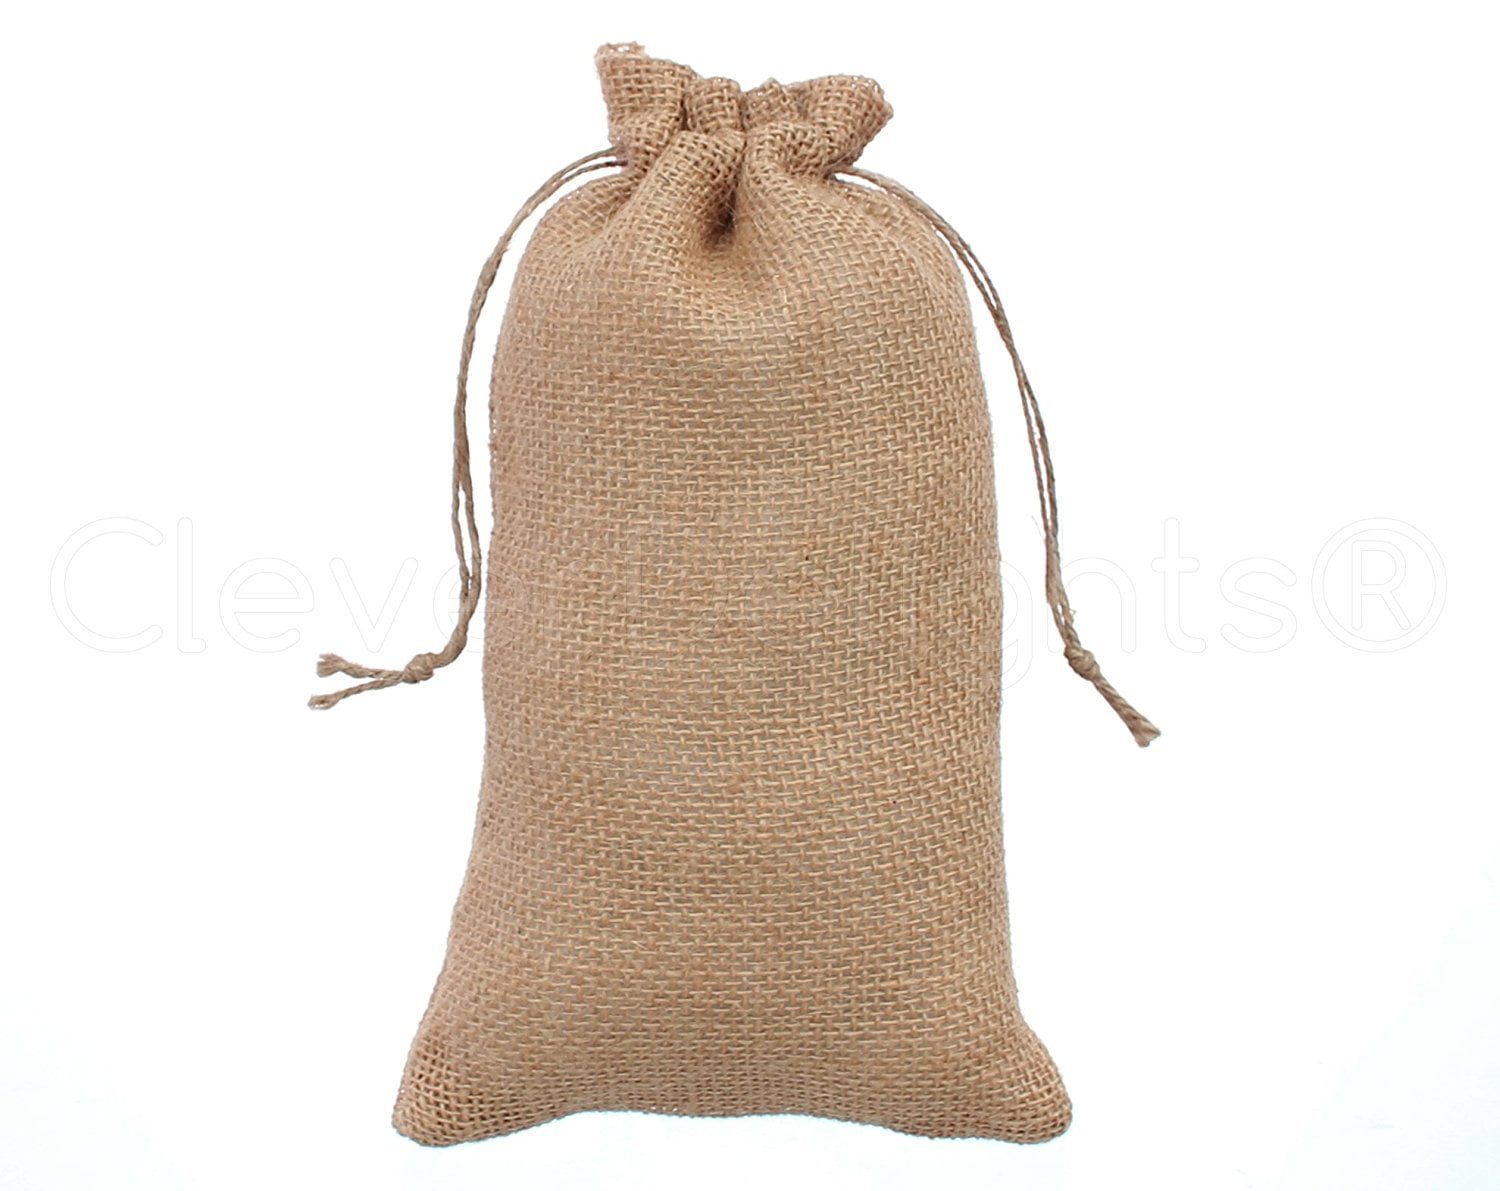 Pouch Sack Bag 18x24 Inch 18" x 24" Burlap Bags with Natural Jute Drawstring 